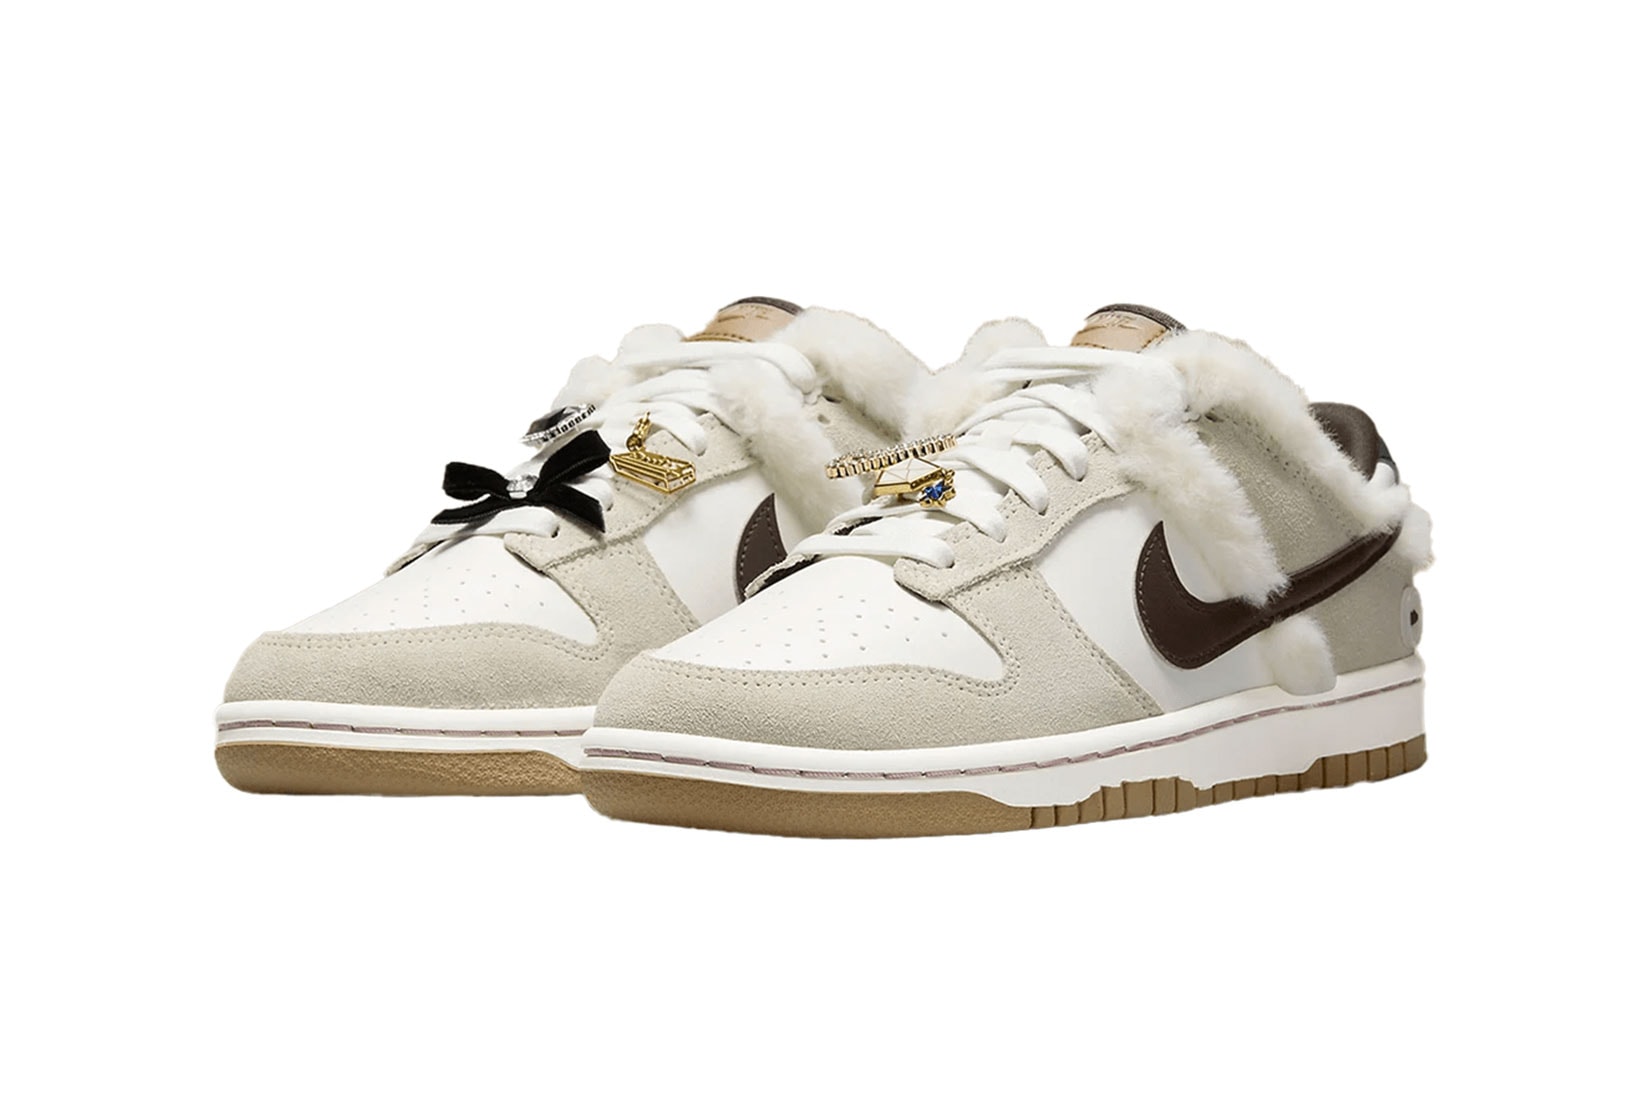 Nike Dunk Low "Fur and Bling" Sneakers Images Release Info